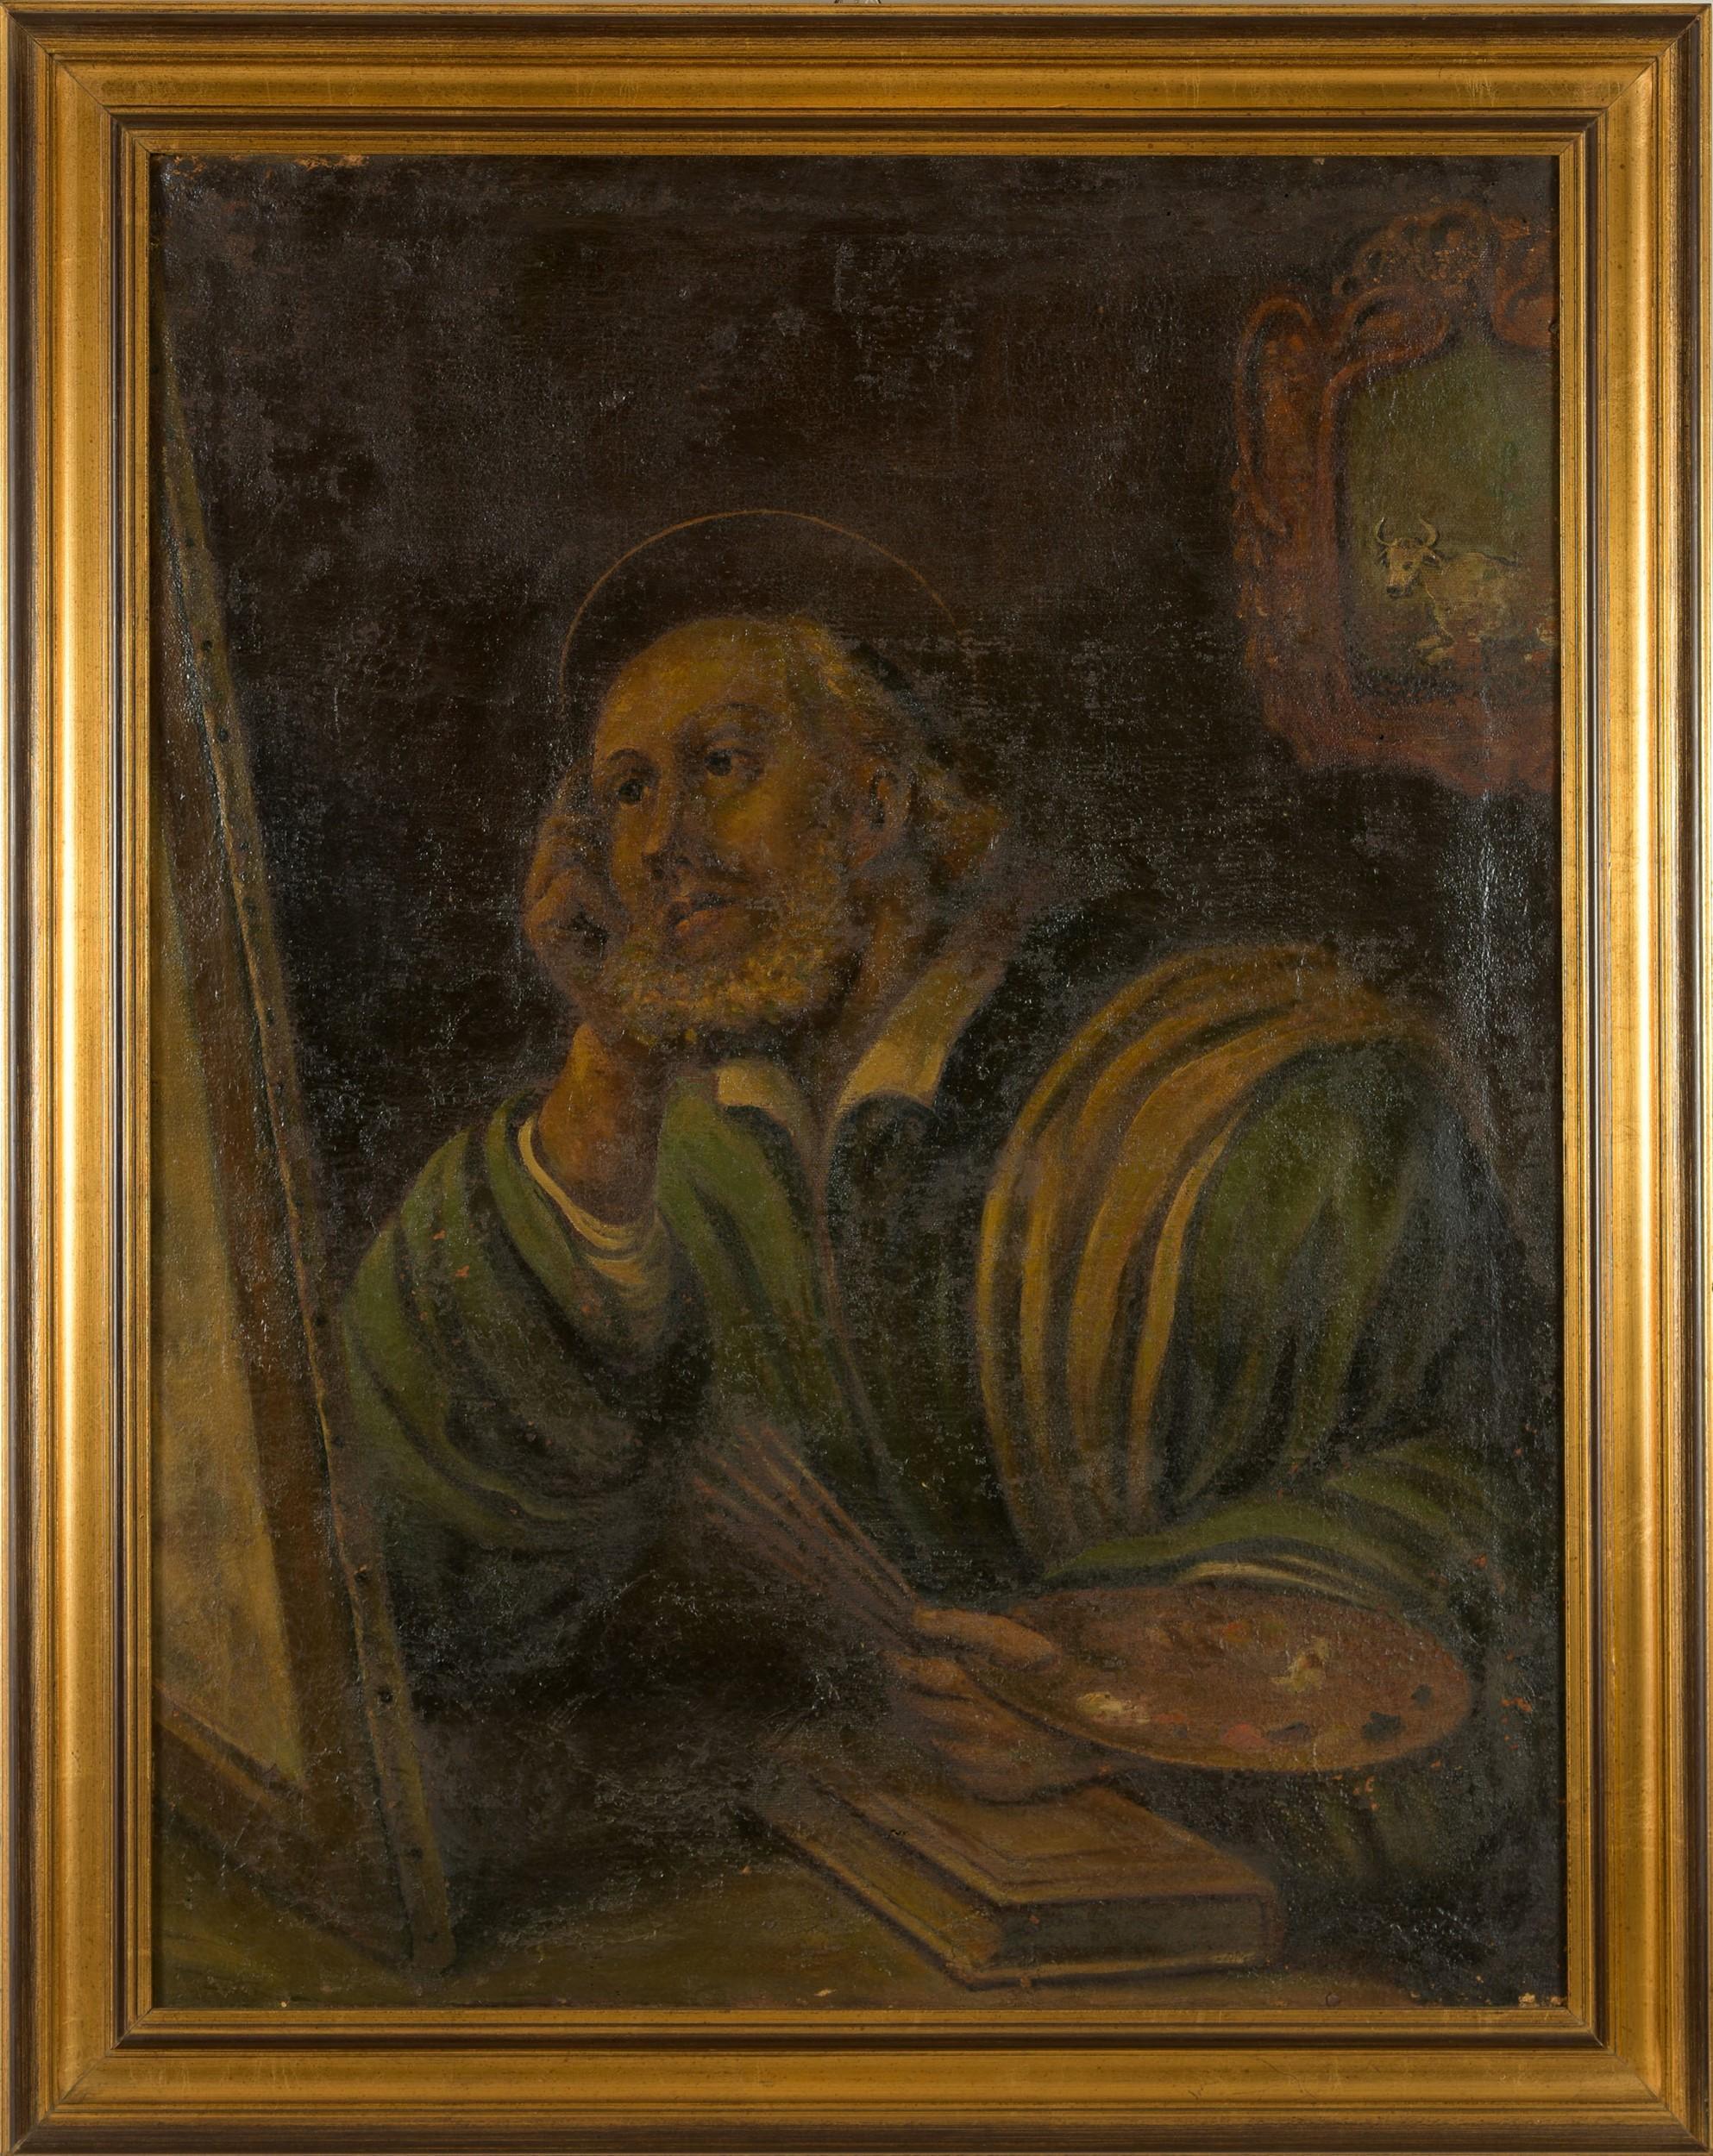 a very impressive and significant portrait of Saint Luke the Evangelist after Giovanni Francesco Barbieri better known as Guercino, or il Guercino that was one of the most famous and notable Italian Baroque painter and draftsman from Cento in the